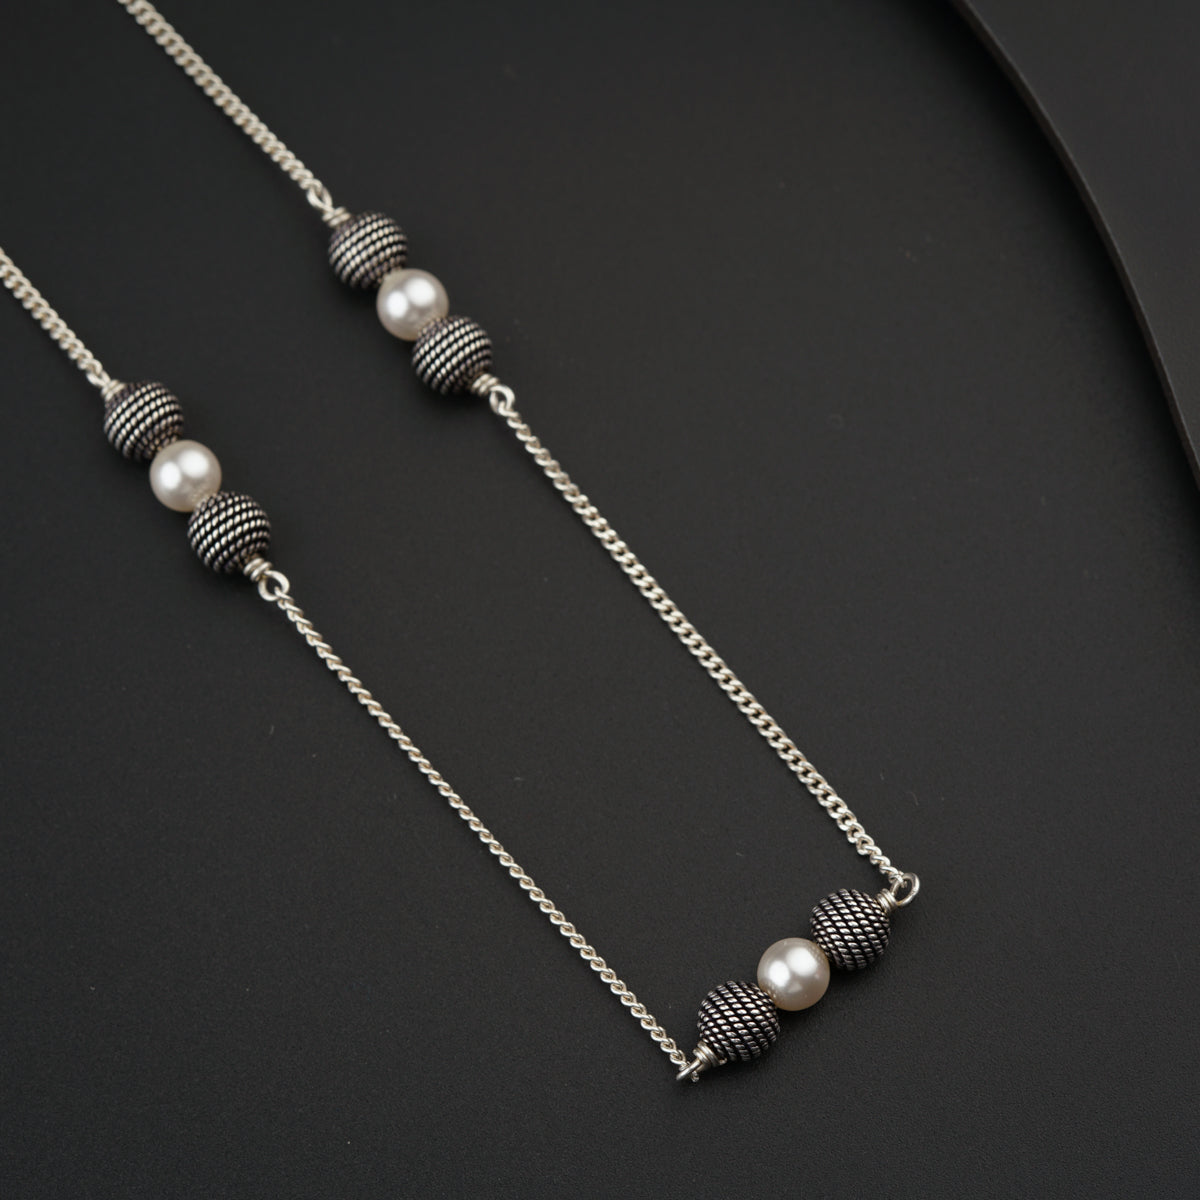 Silver Bead Necklace with Pearls